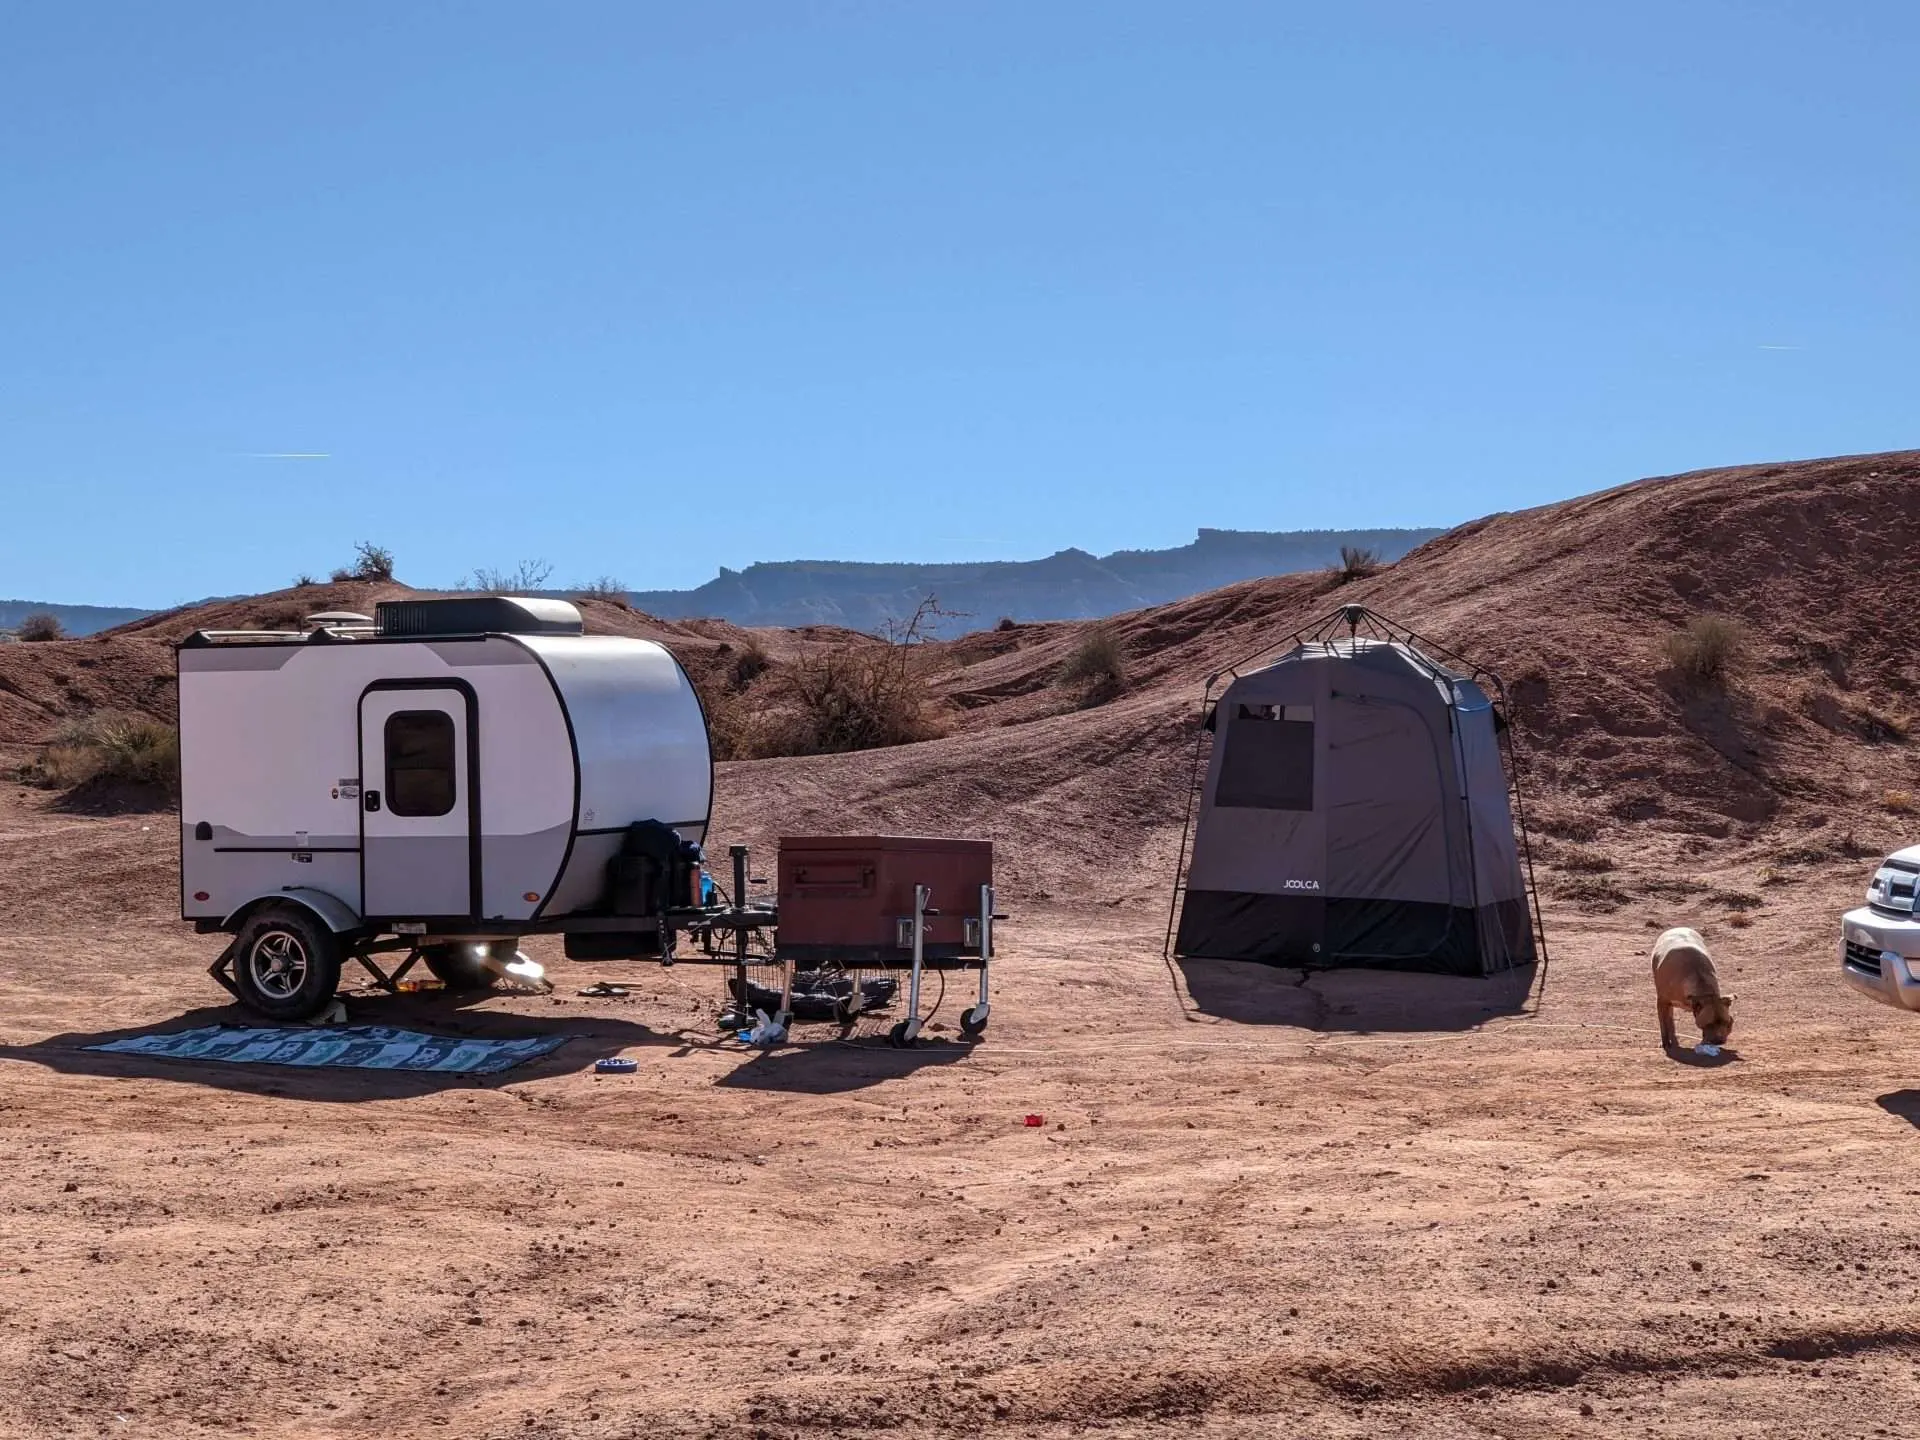 camping setup with tent and guard dog